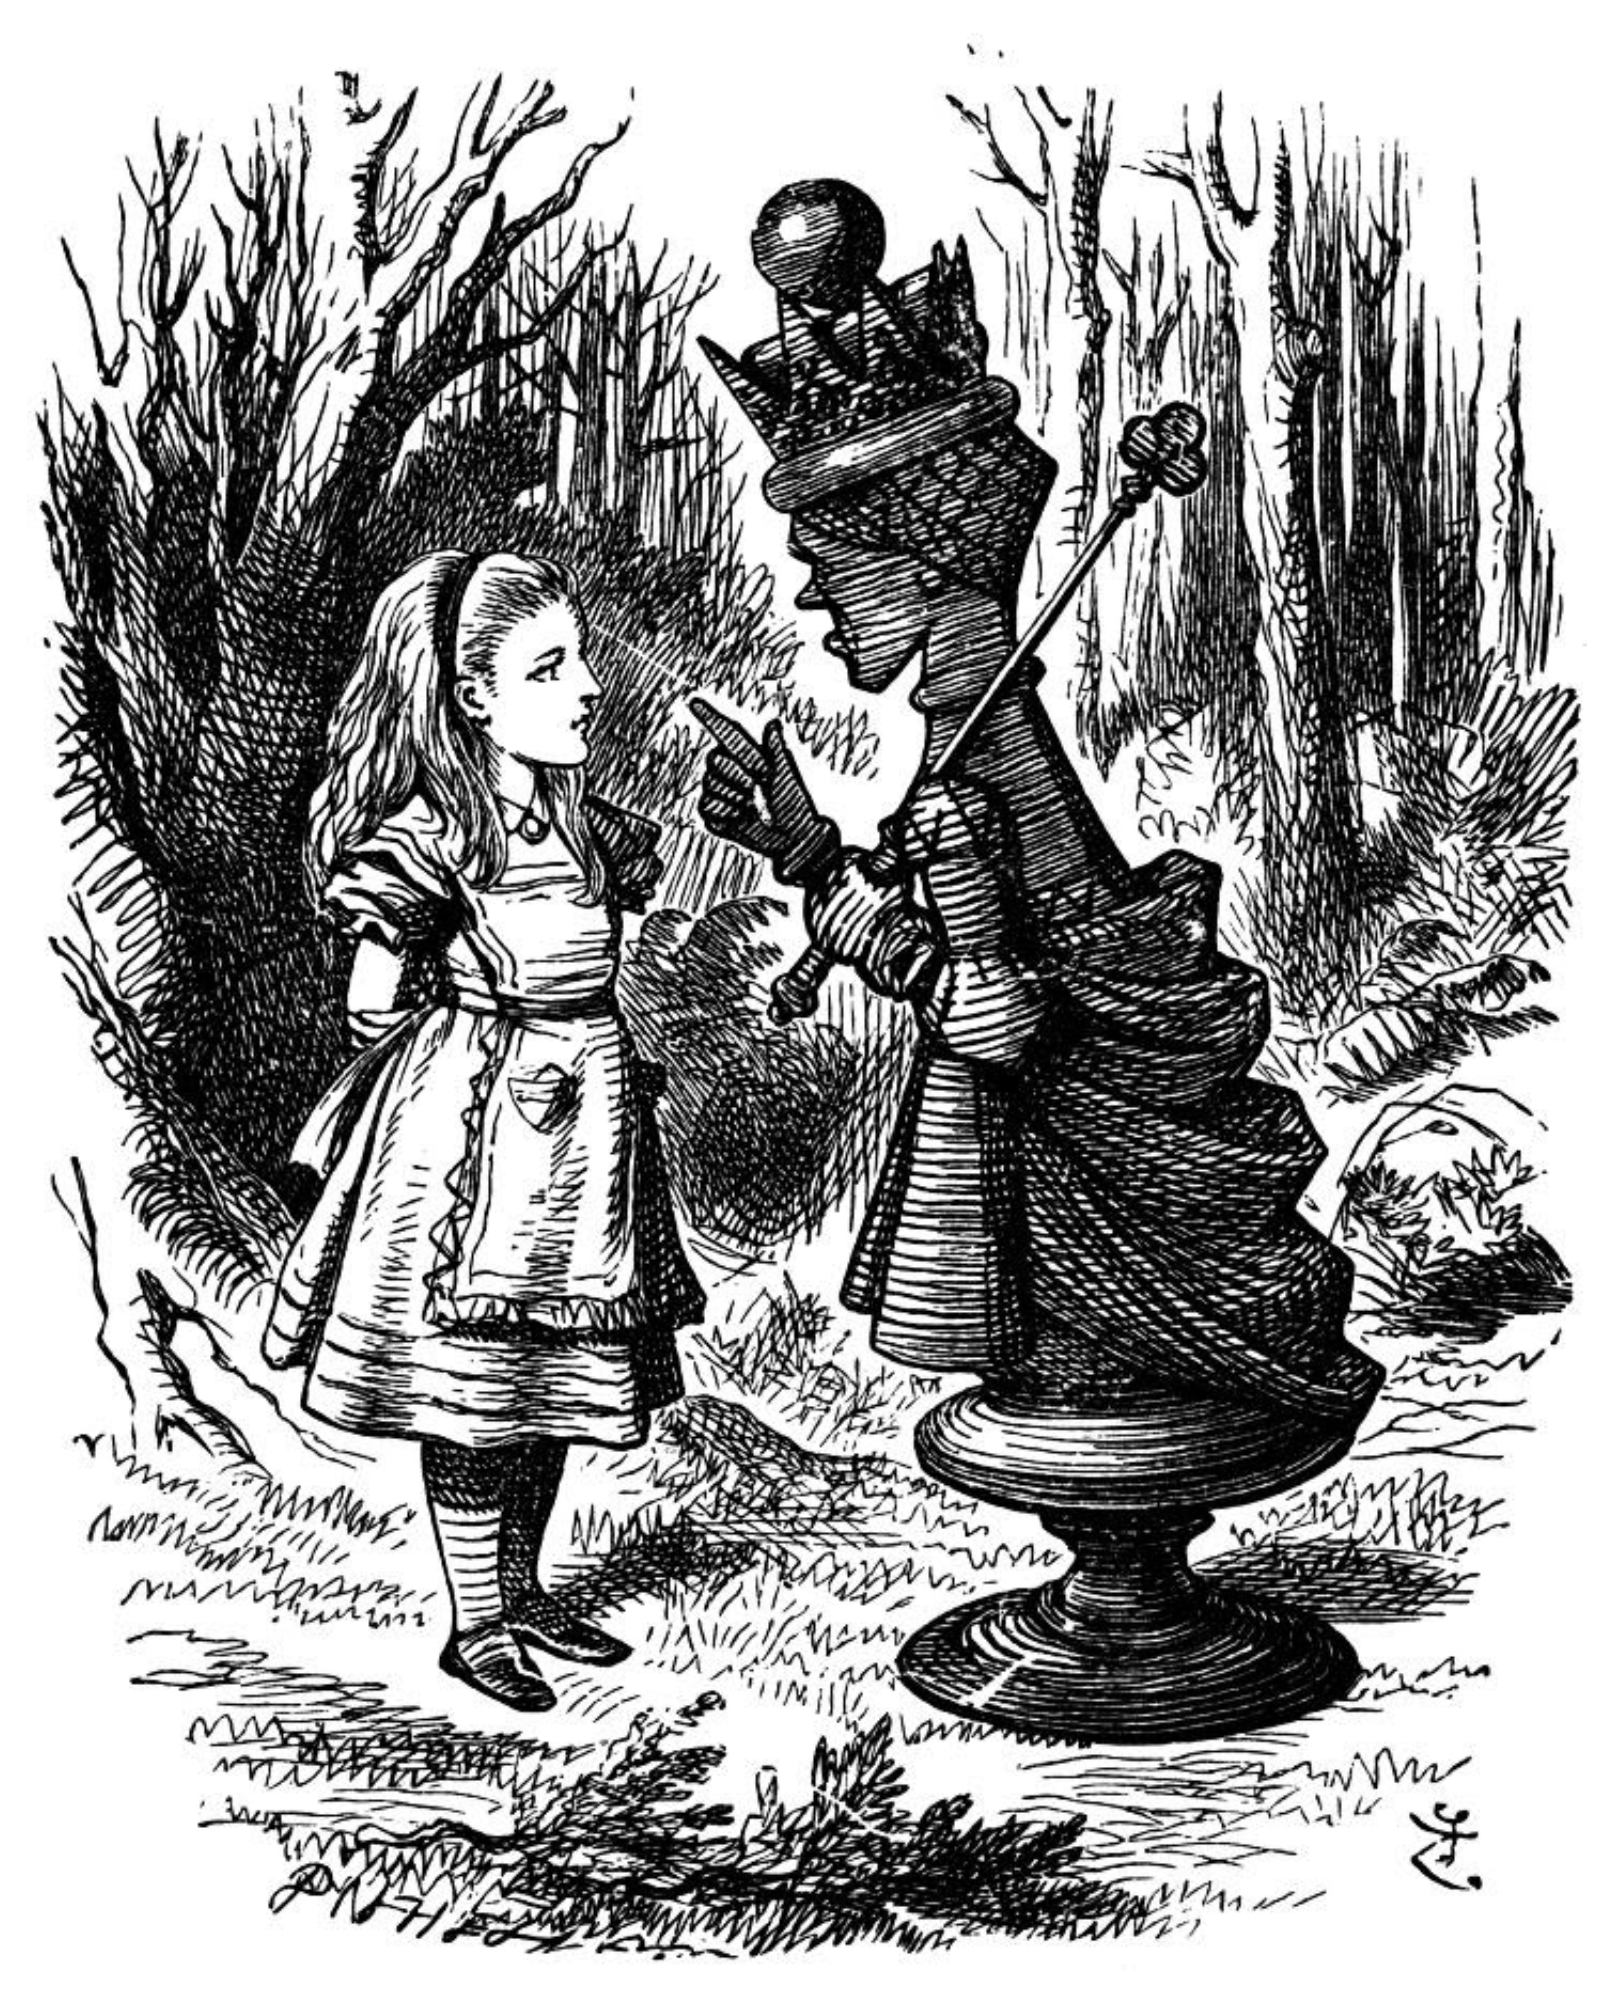 illustration of the red queen and alice from alice in wonderland.